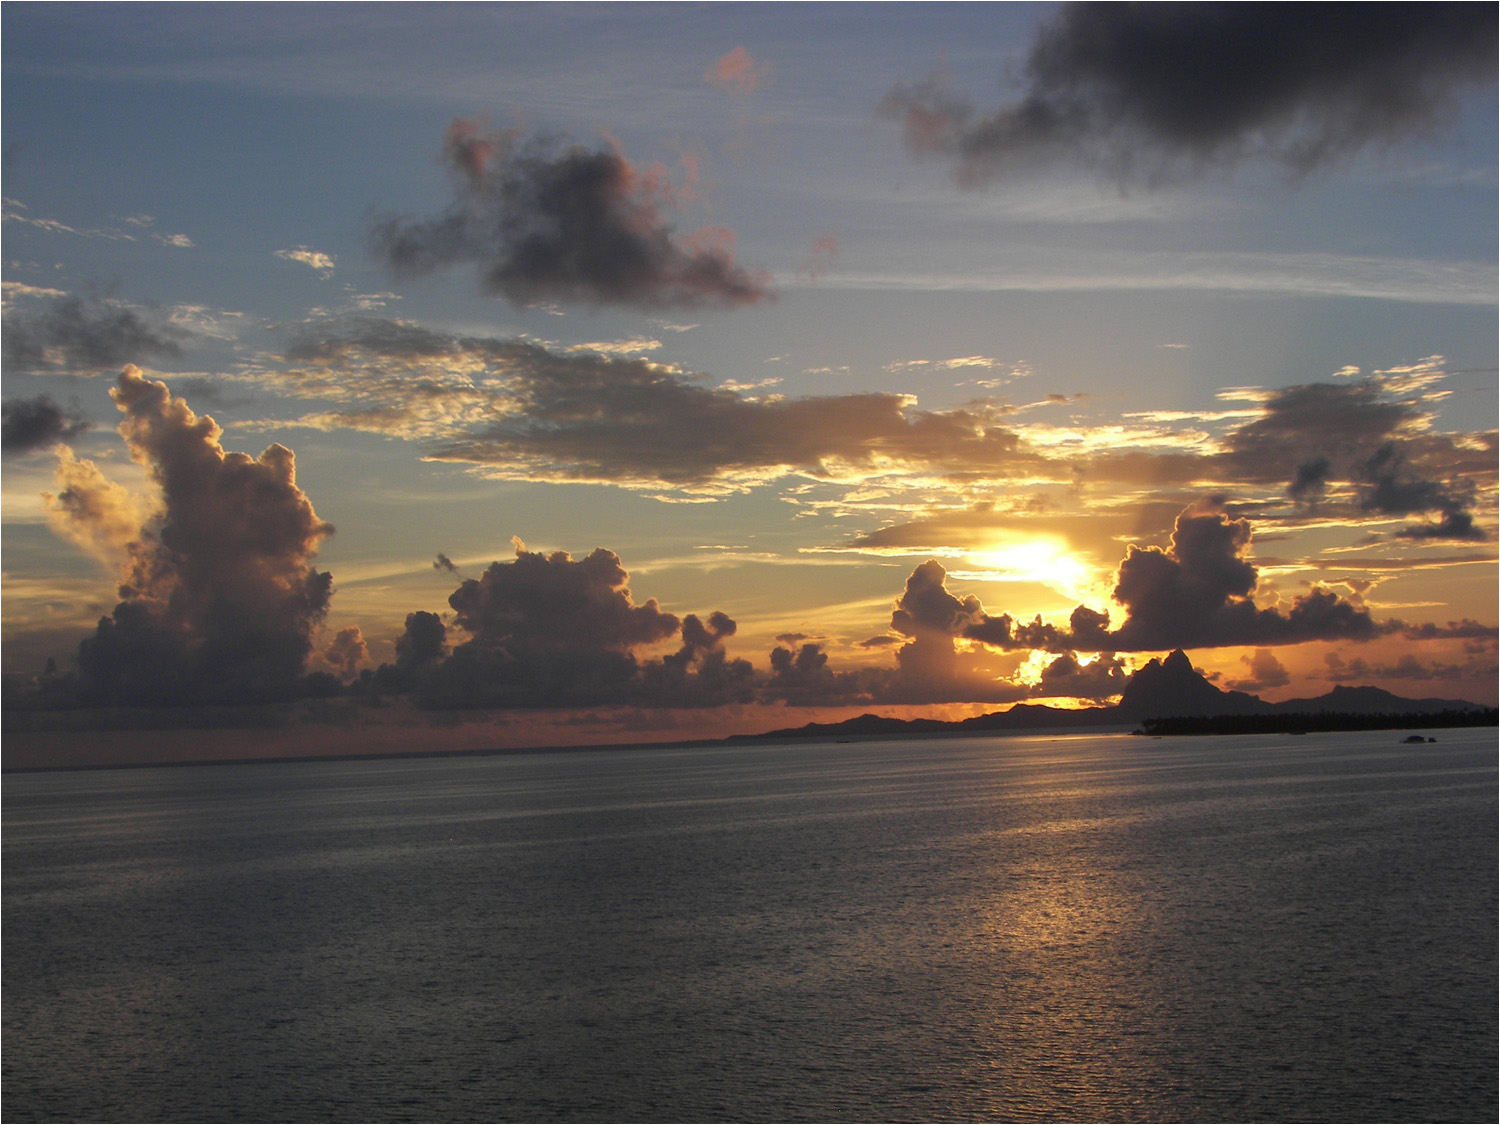 Sunset Moday evening in Tahaa with Bora Bora in the distance